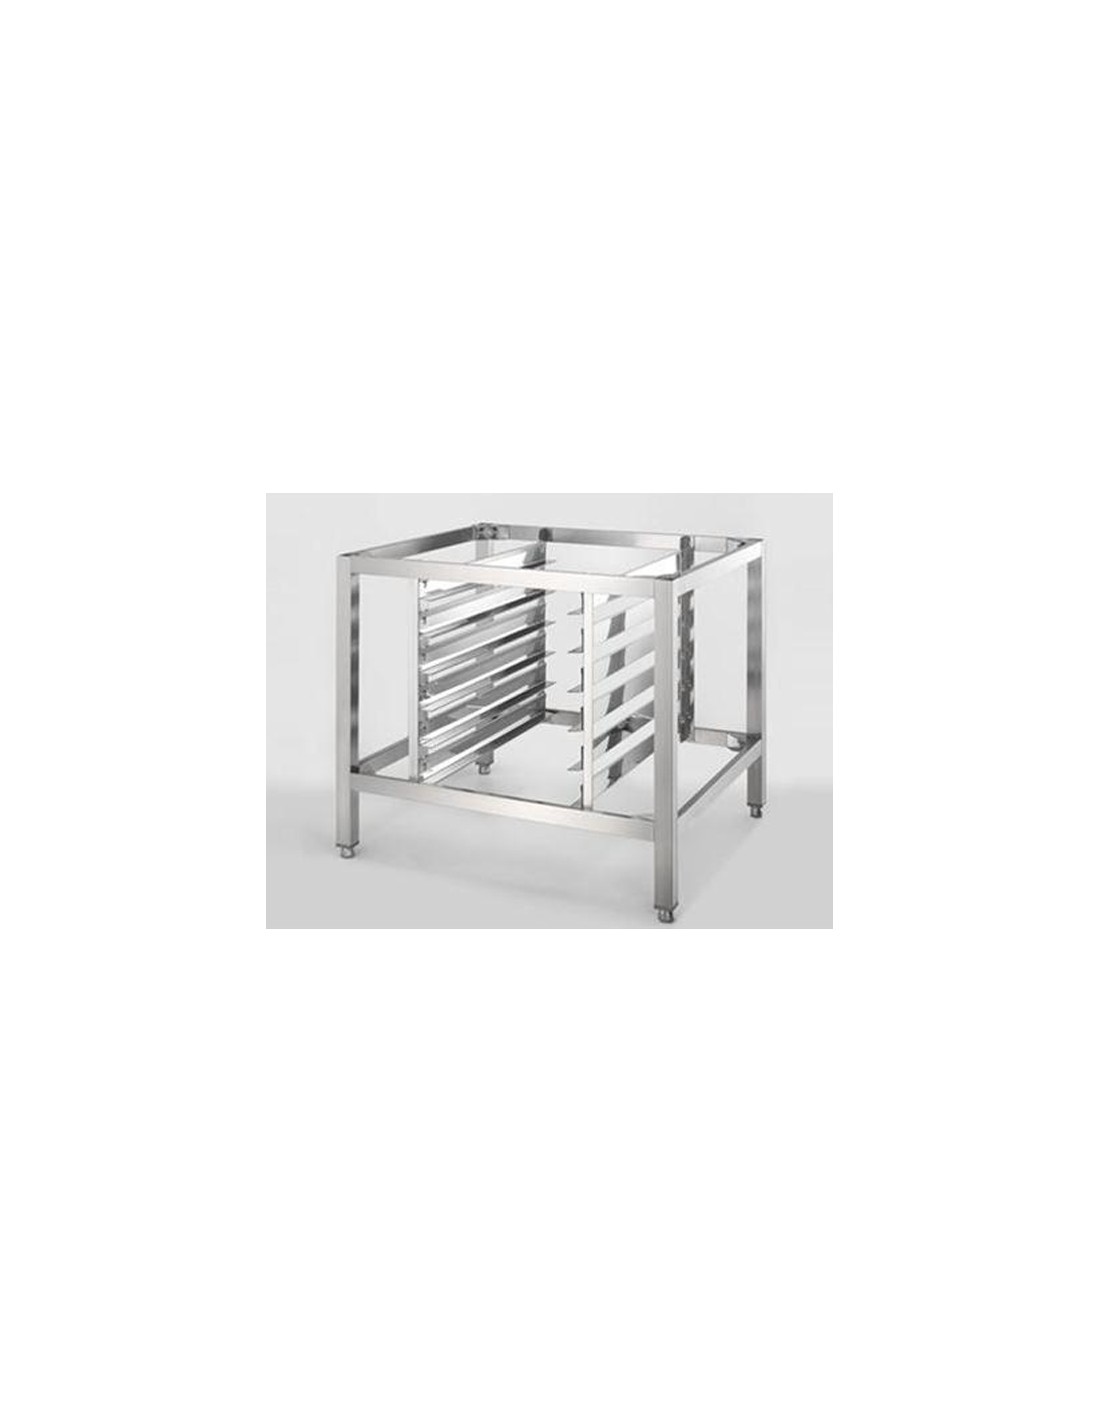 Stainless steel table + h cm 100 - Capacity 9 sheets